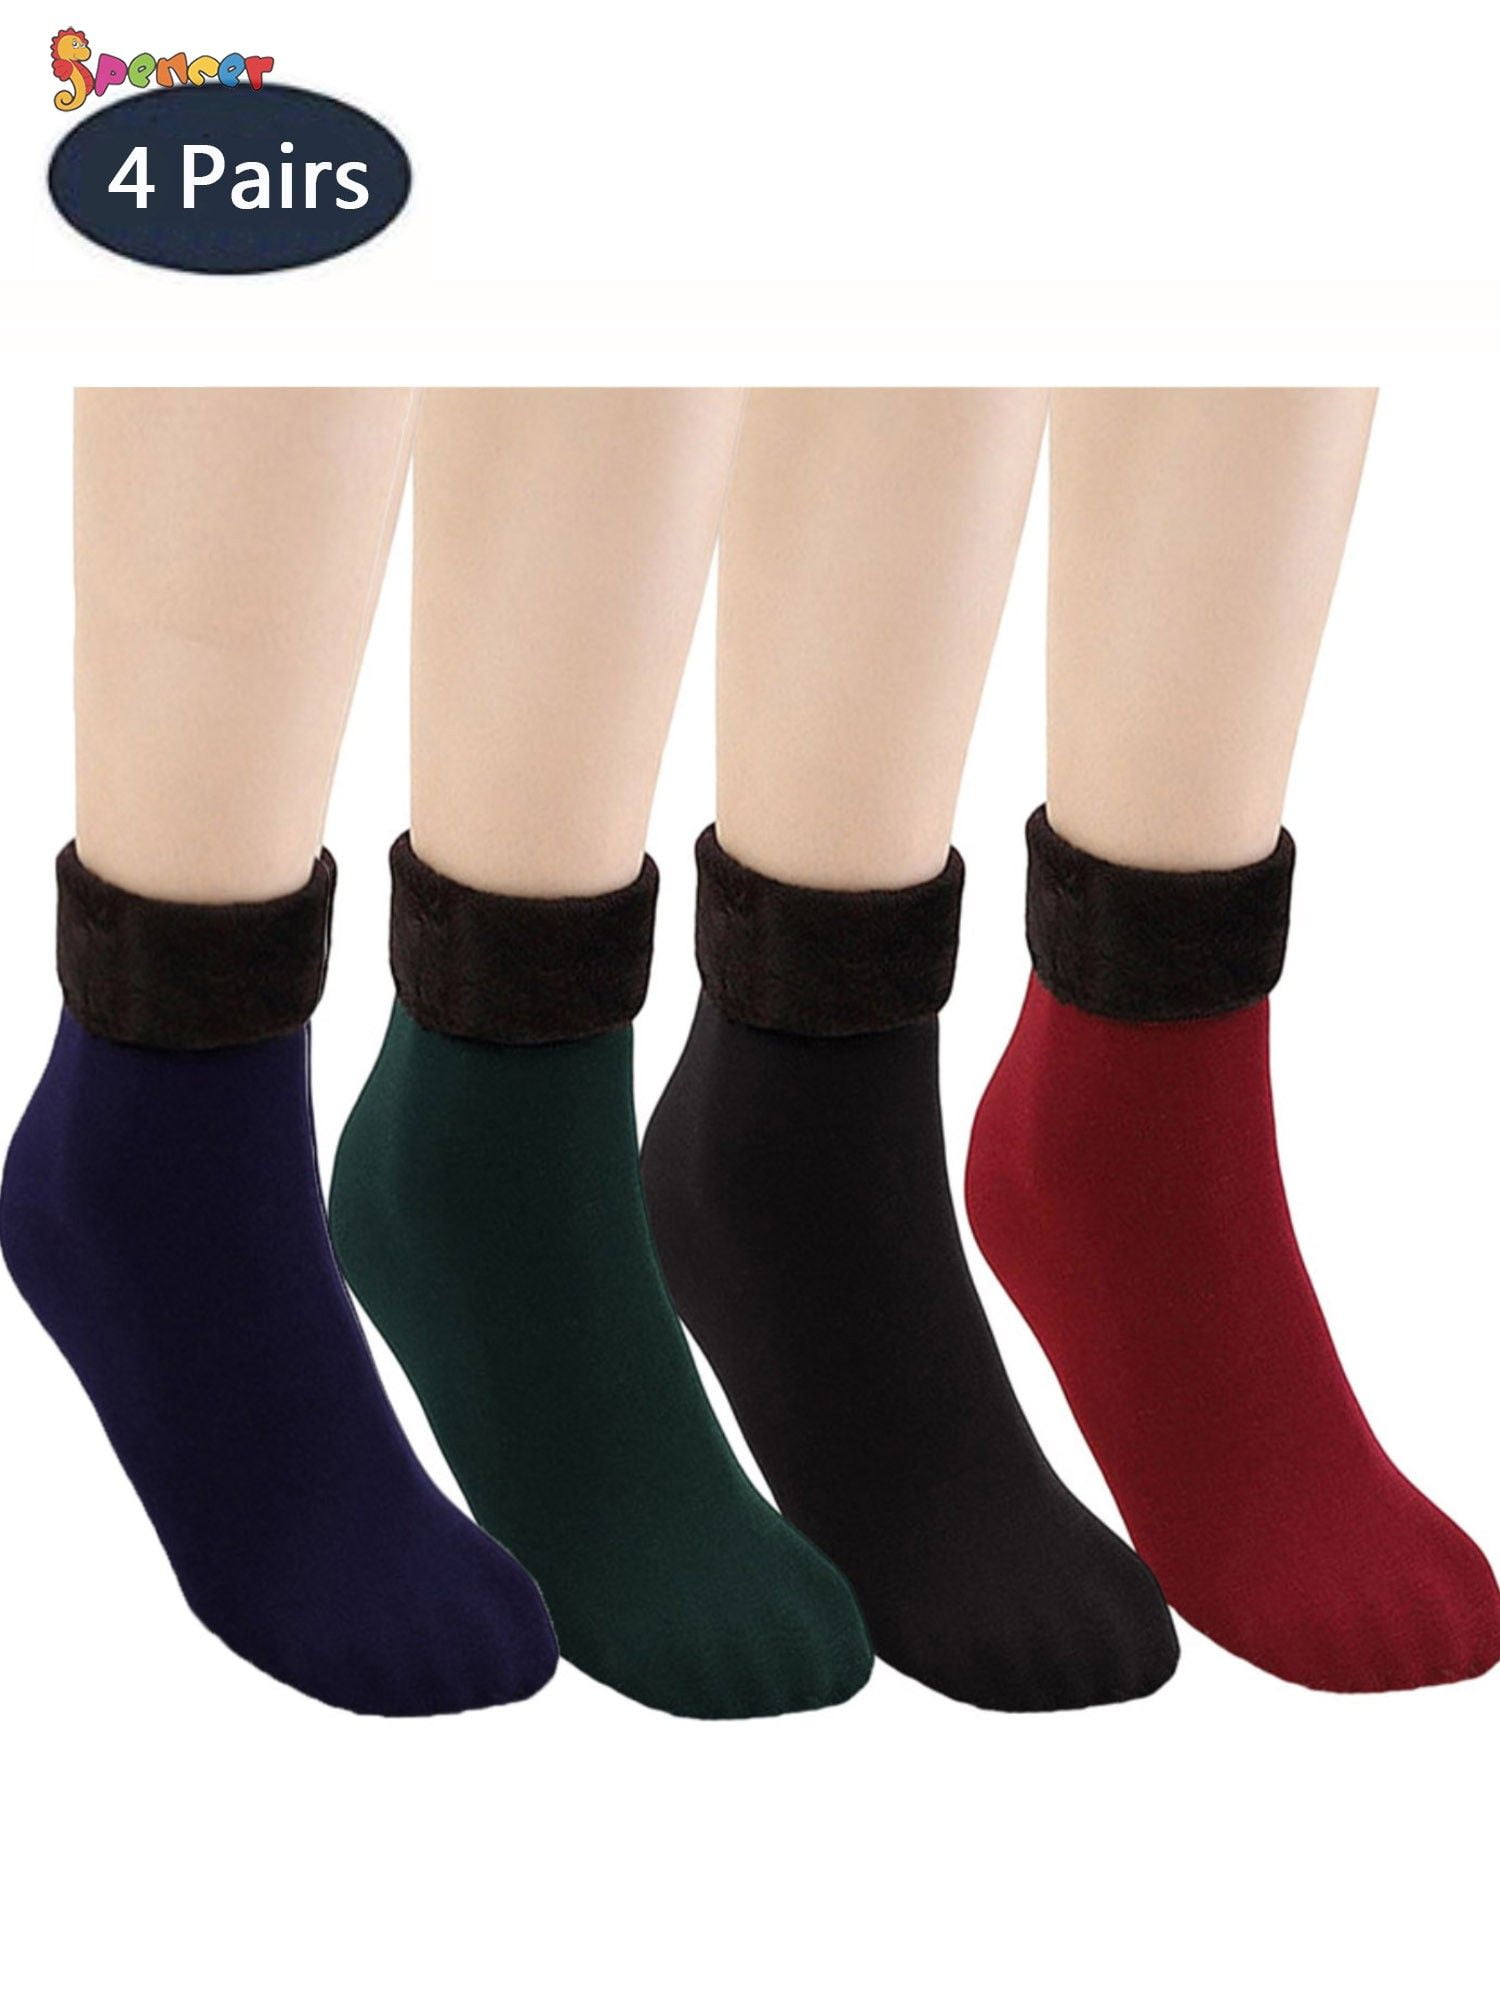 Spencer 4 Pairs Women's Winter Warm Fleece Lined Socks Solid Thick ...